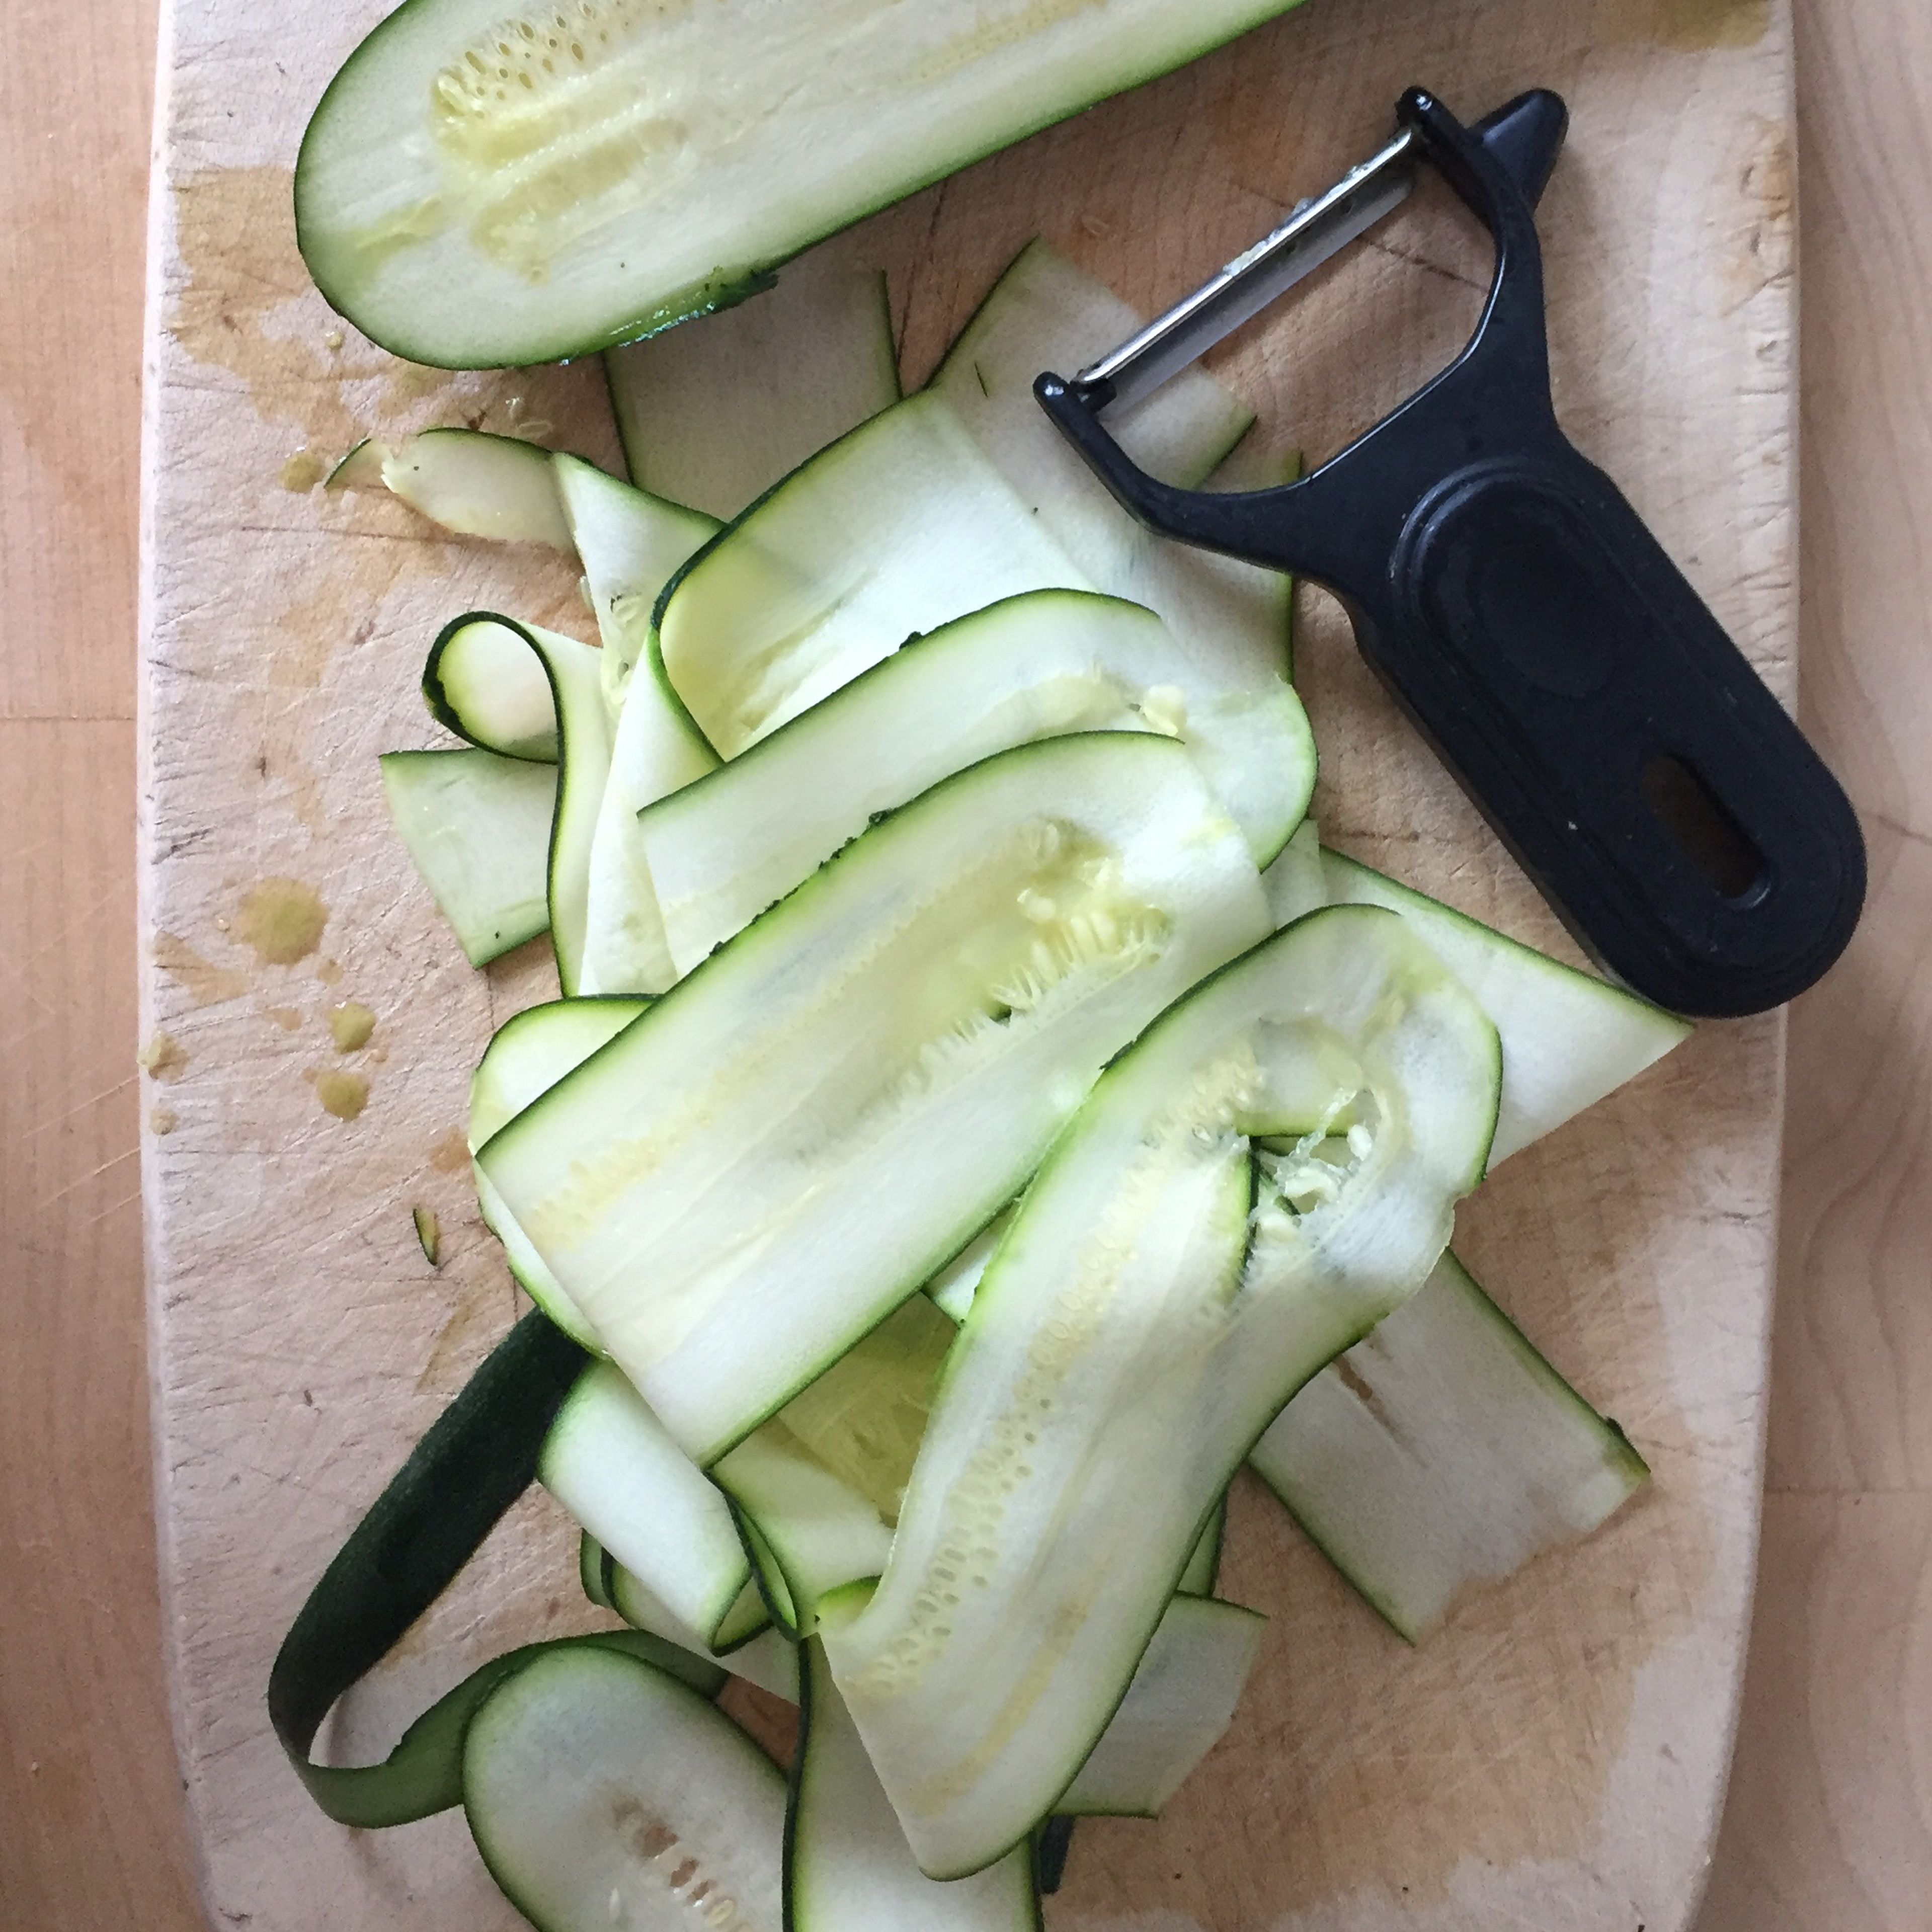 Use a vegetable peeler to finely slice the zucchini.